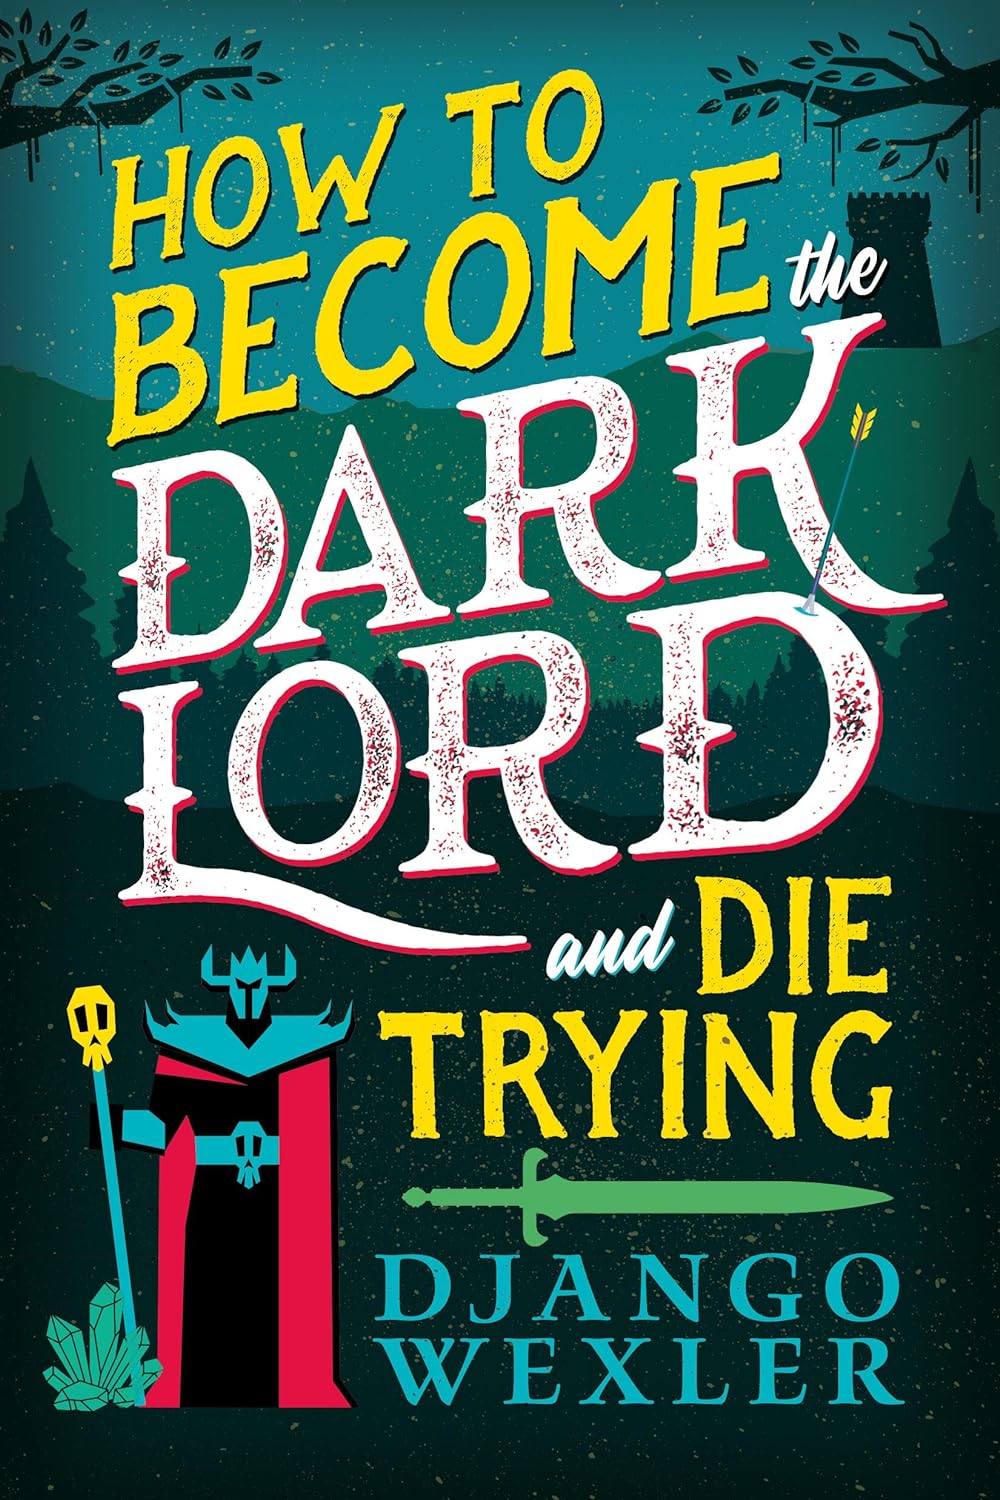 cover of Django Wexler's How to Become the Dark Lord and Die Trying, with a stylized dark lord image